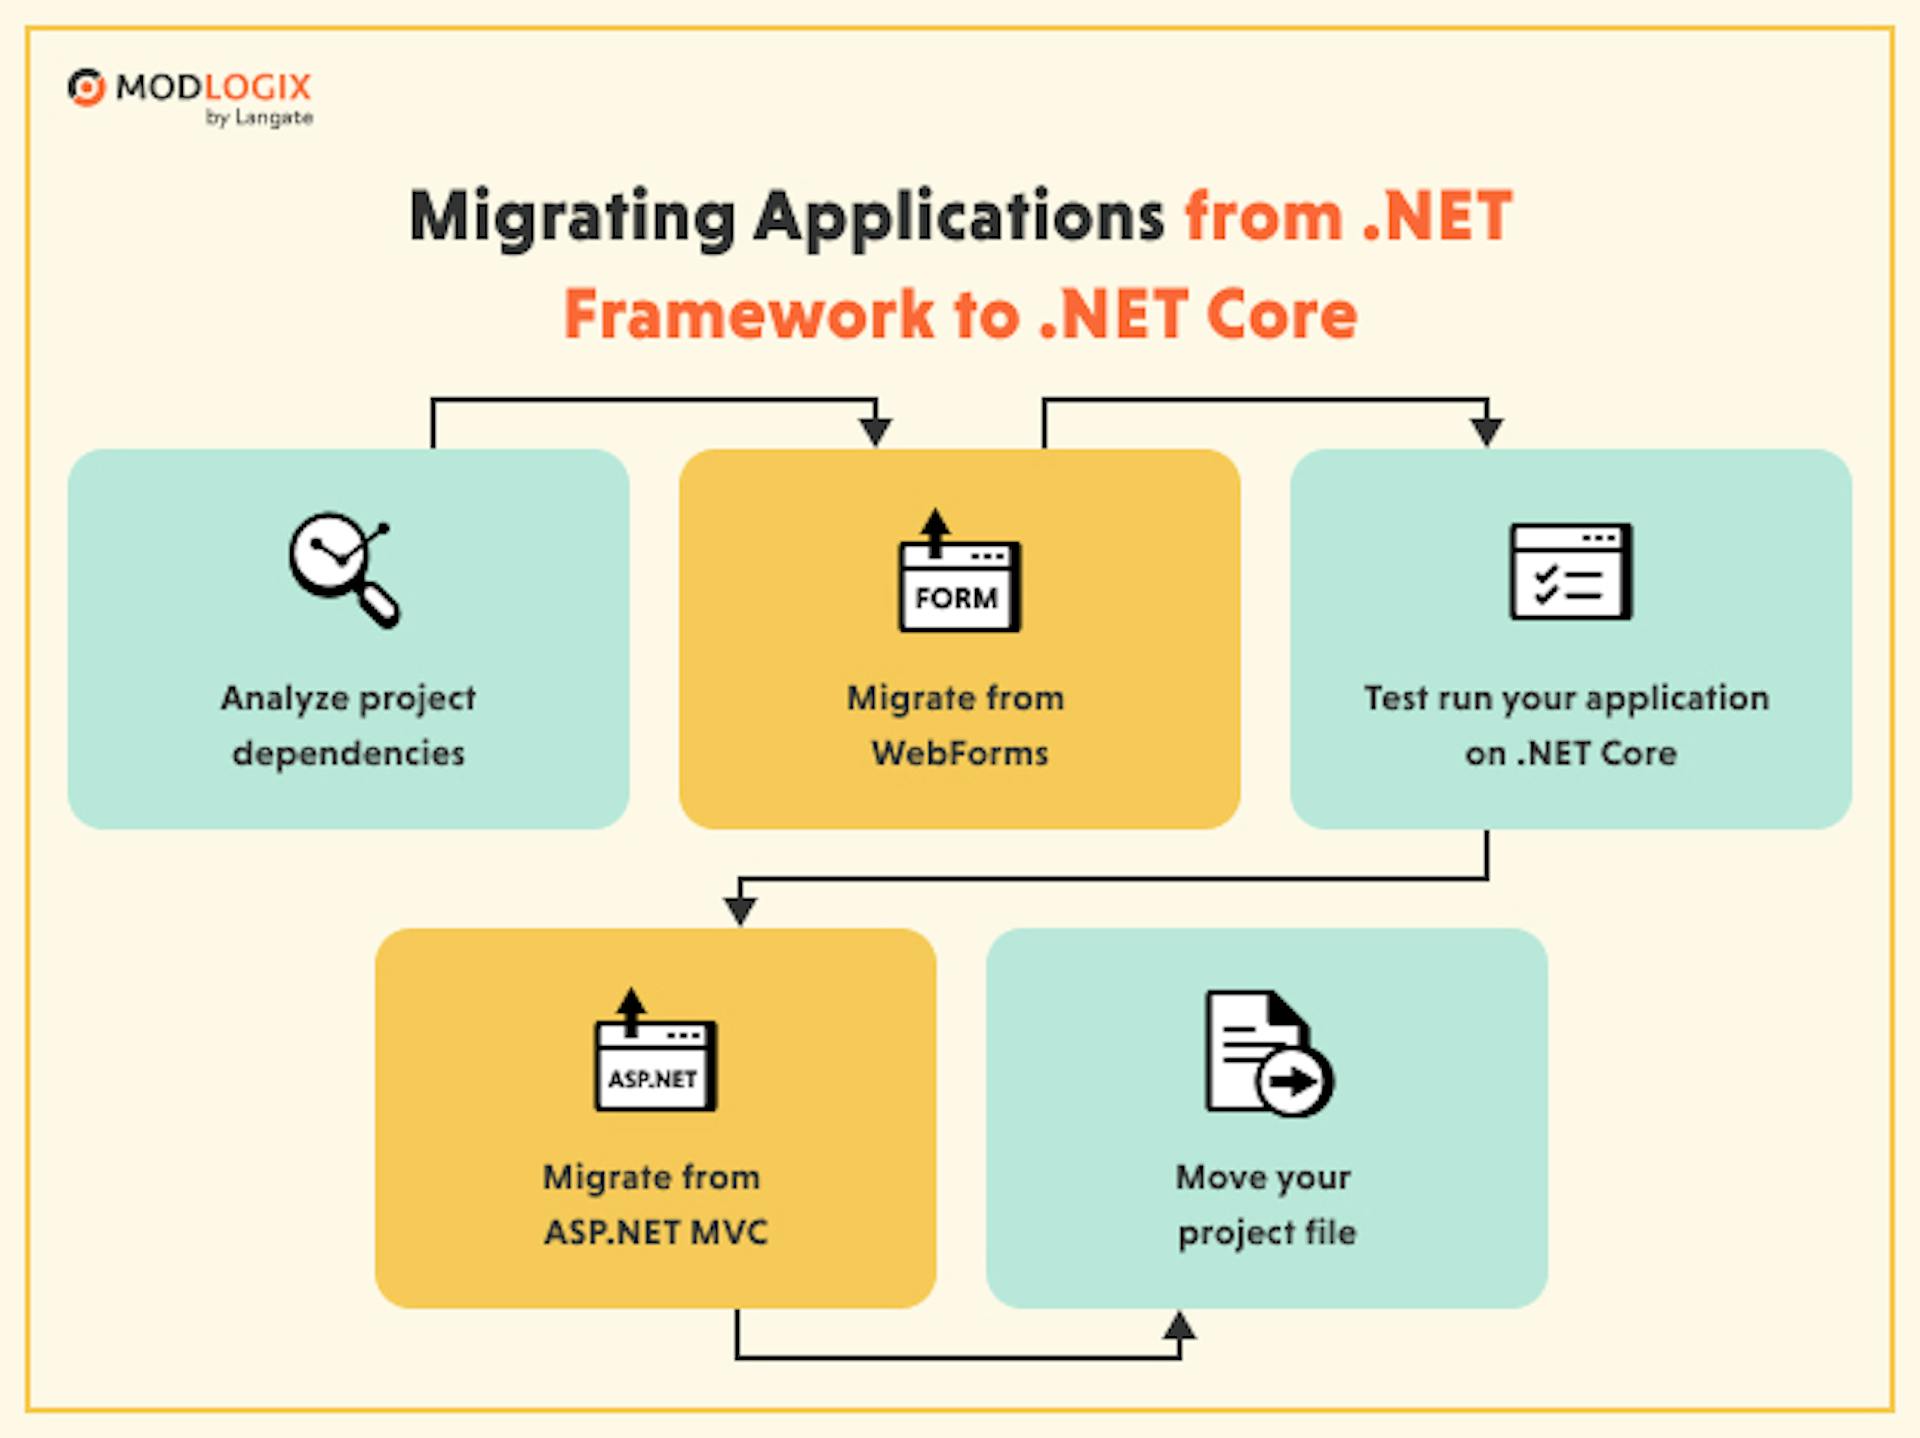 How to move your project from .NET Framework to .NET Core